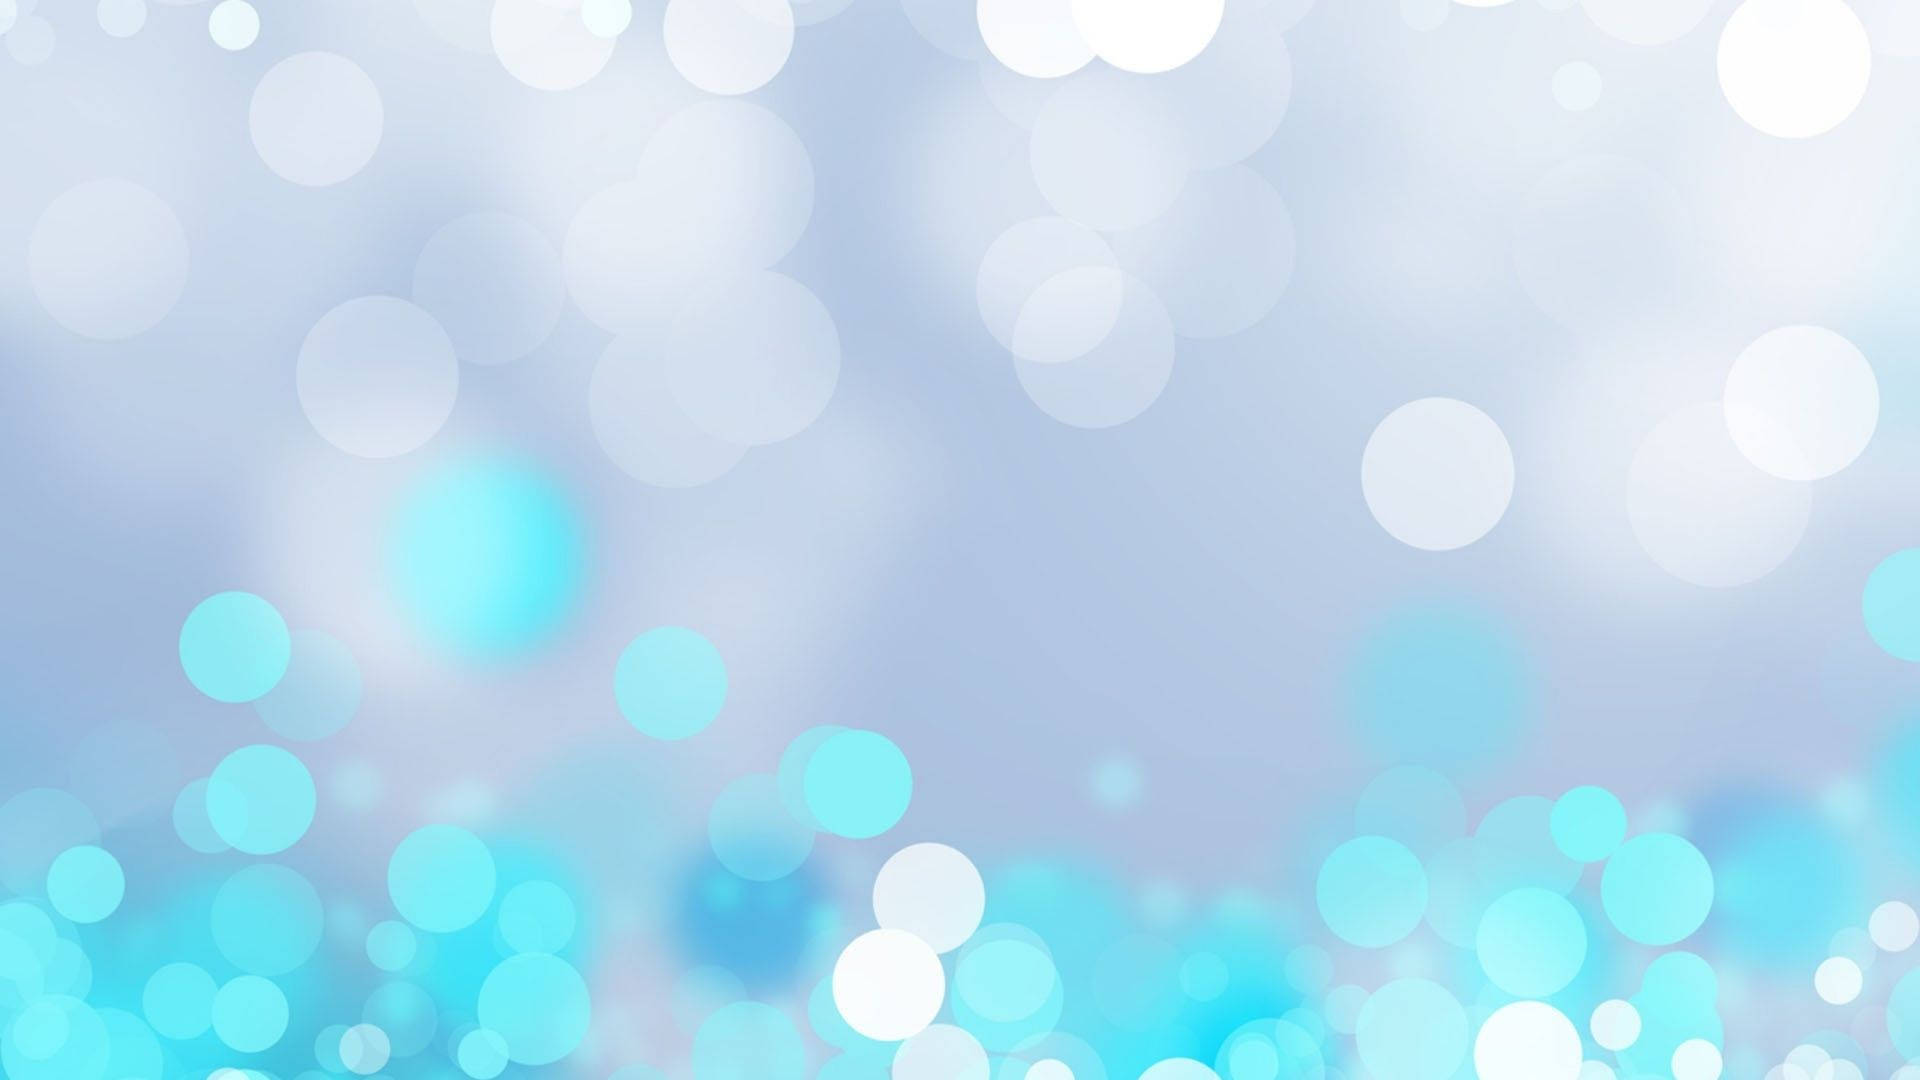 Baby Blue Blurred Circles Background